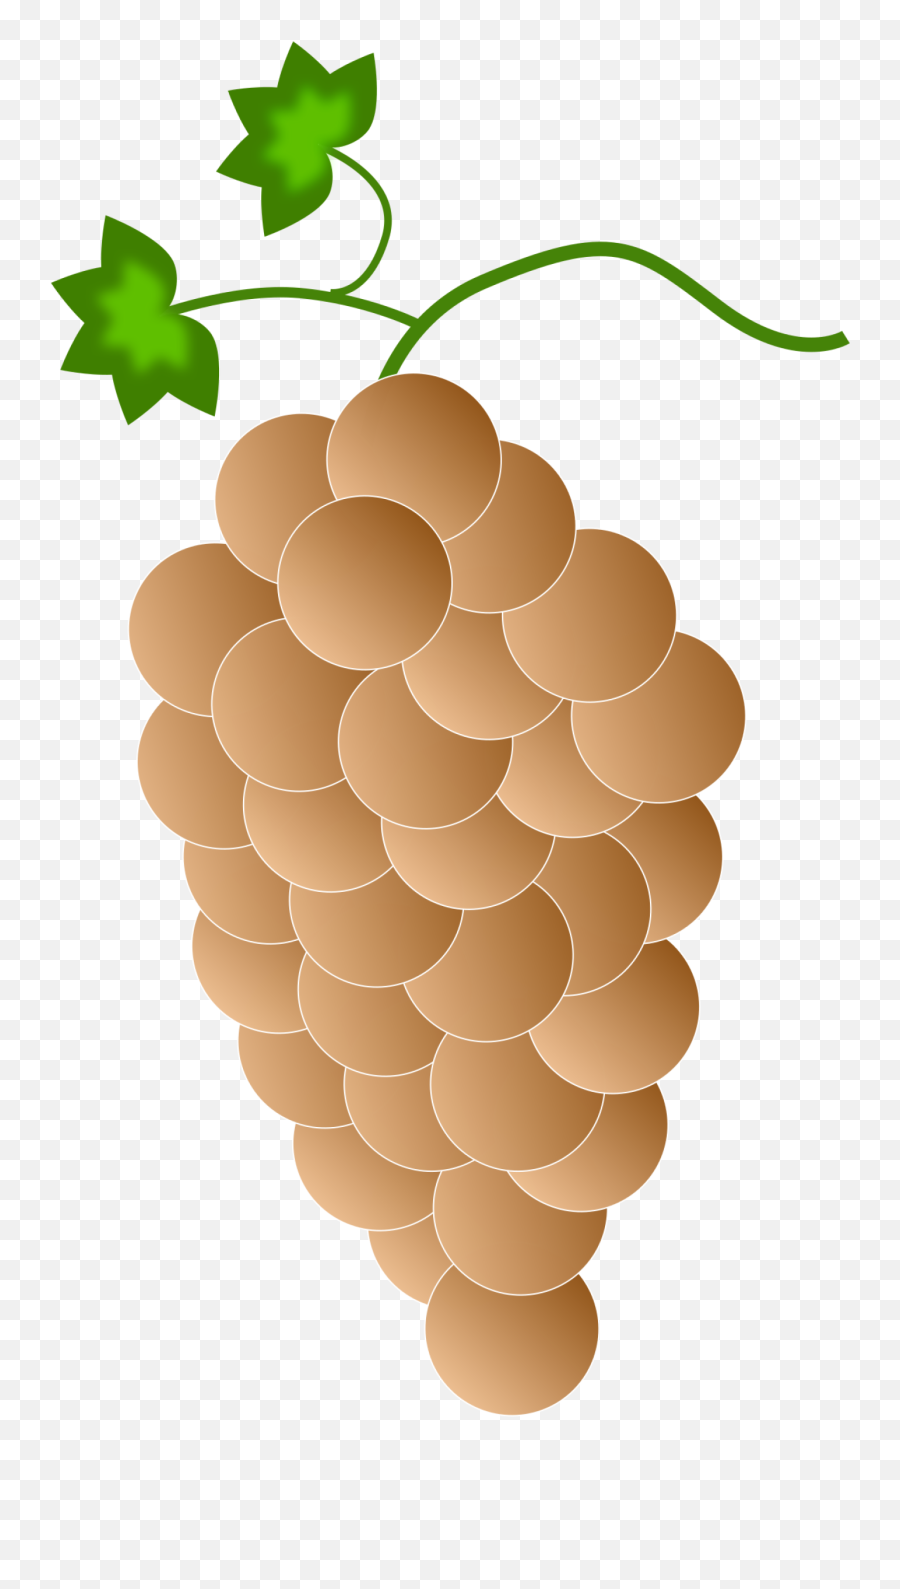 Grape Clipart Png In This 4 Piece Grape Svg Clipart And Png Images - Orange Grapes Clipart Emoji,Grape Clipart